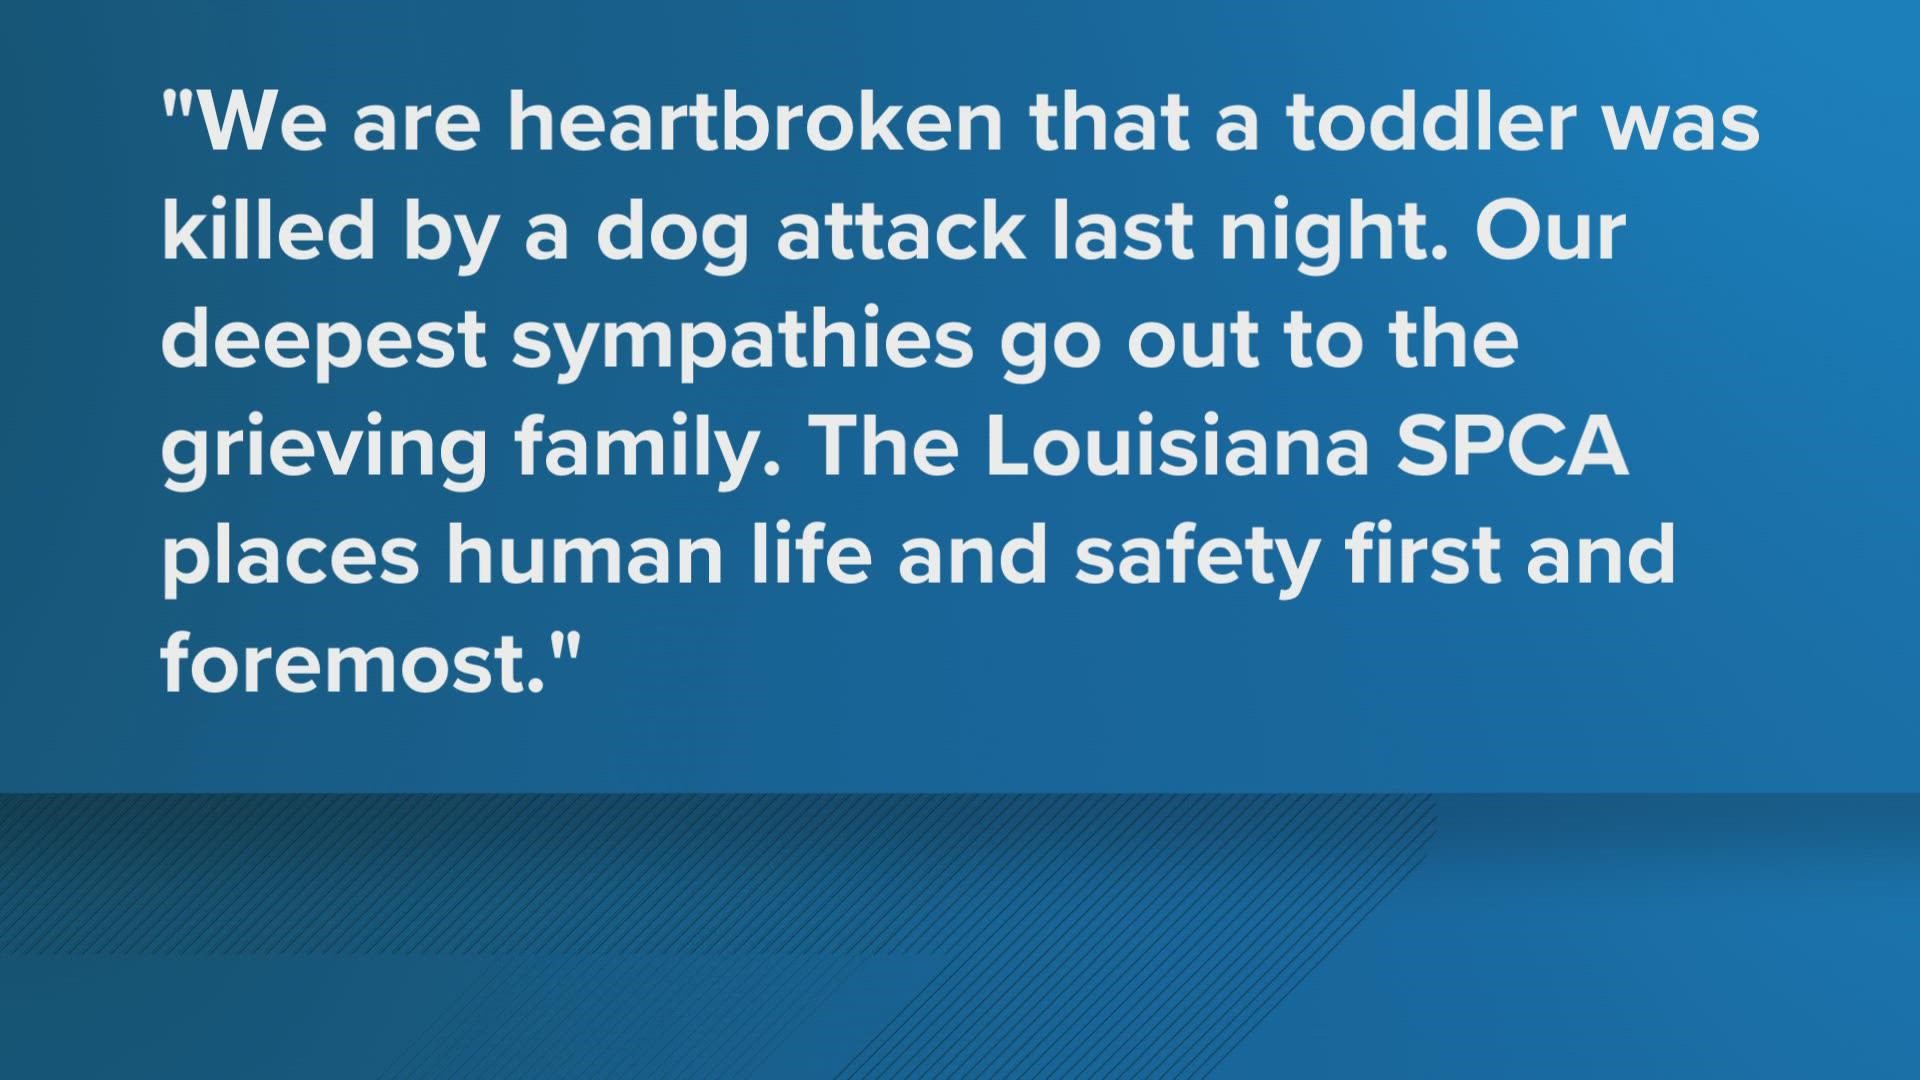 New Orleans police say an LASPCA employee tried to subdue the dog in the backyard, and the dog reportedly attacked them